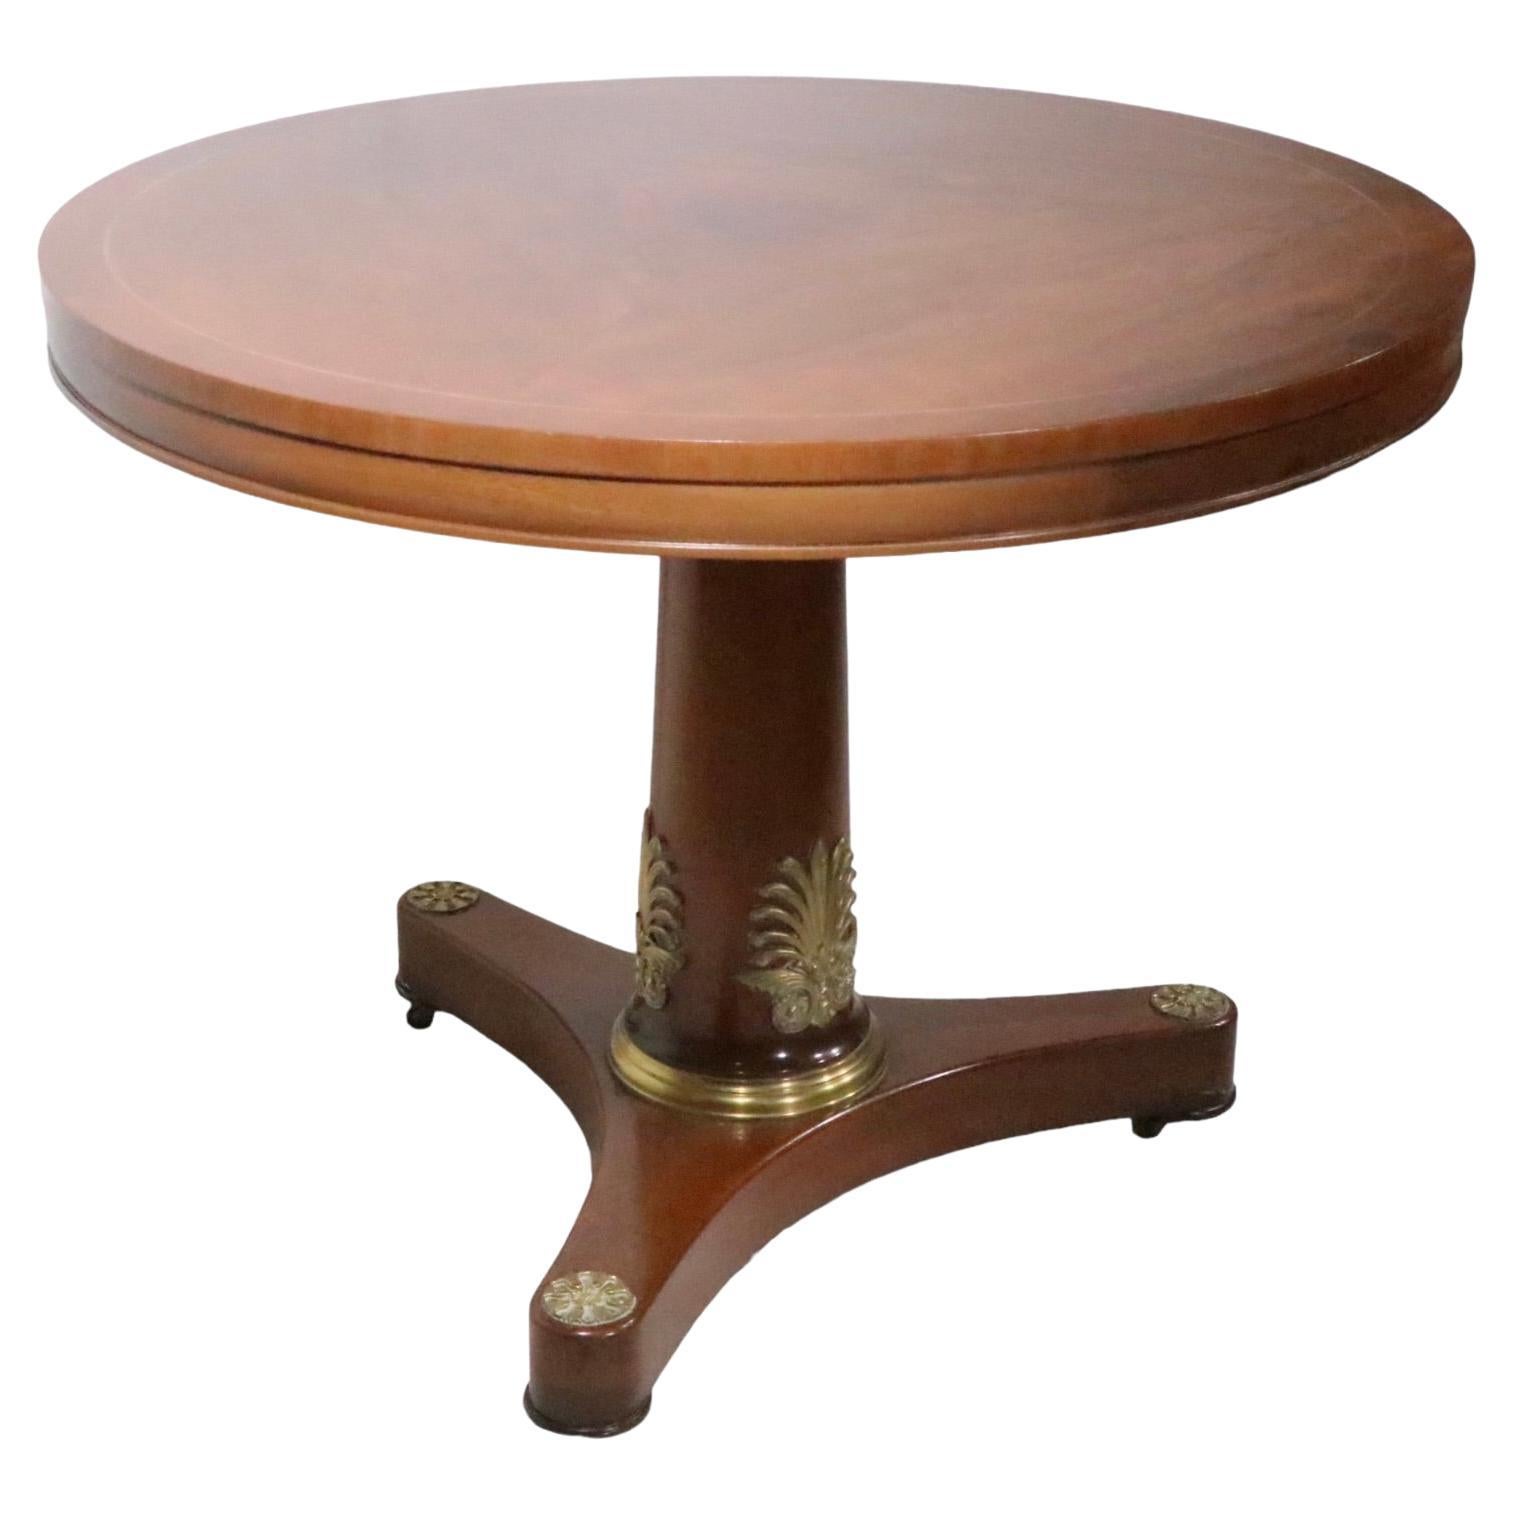 French Empire Style Center Table with Brass Ormolu Trim by Kittinger Furniture 